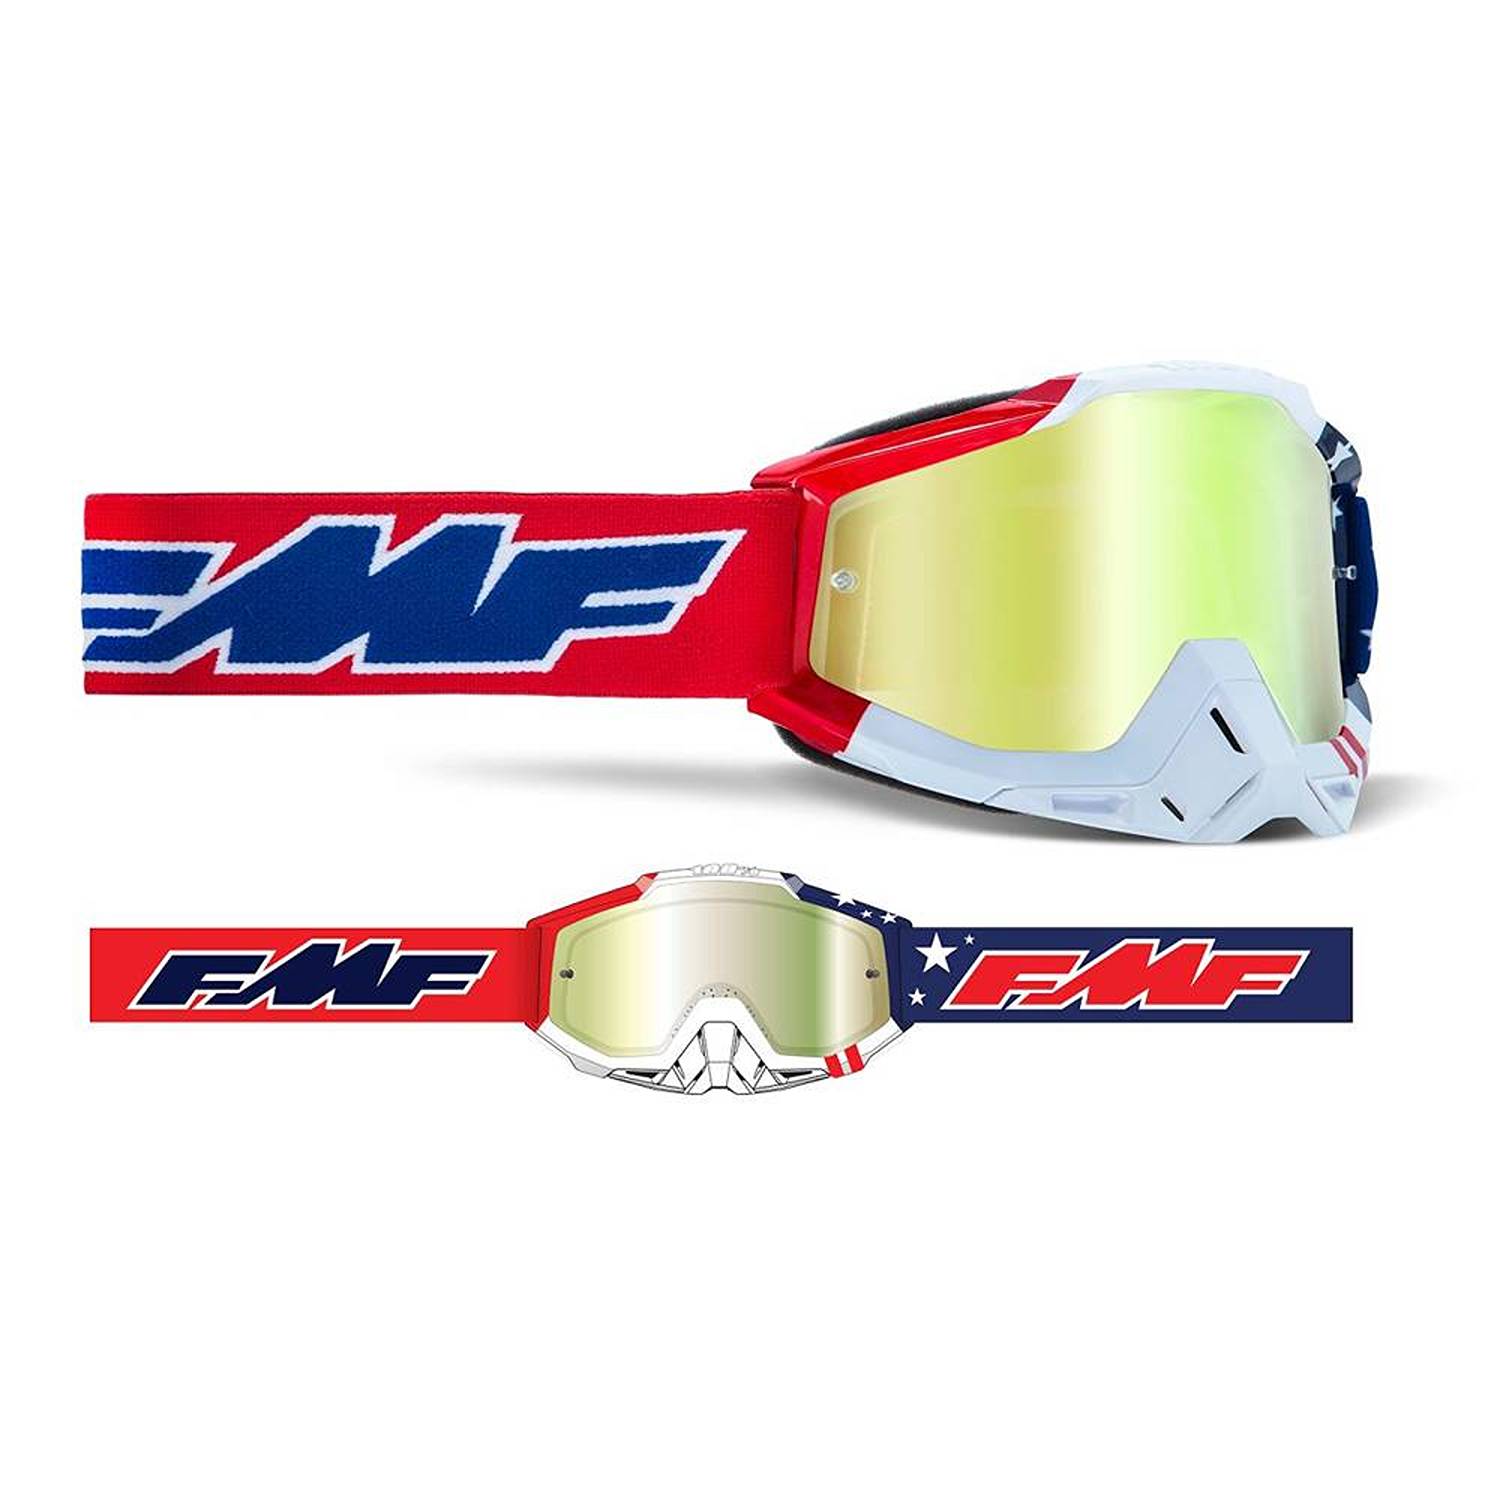 FMF Powerbomb Rocket US of A Mirror Gold Goggles Size